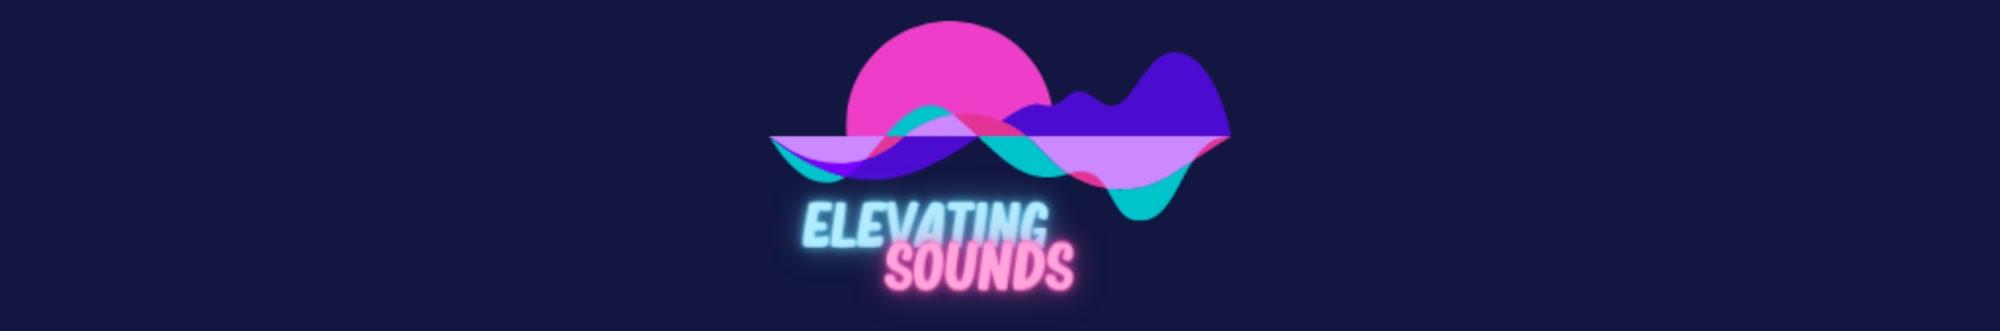 Elevating Sounds